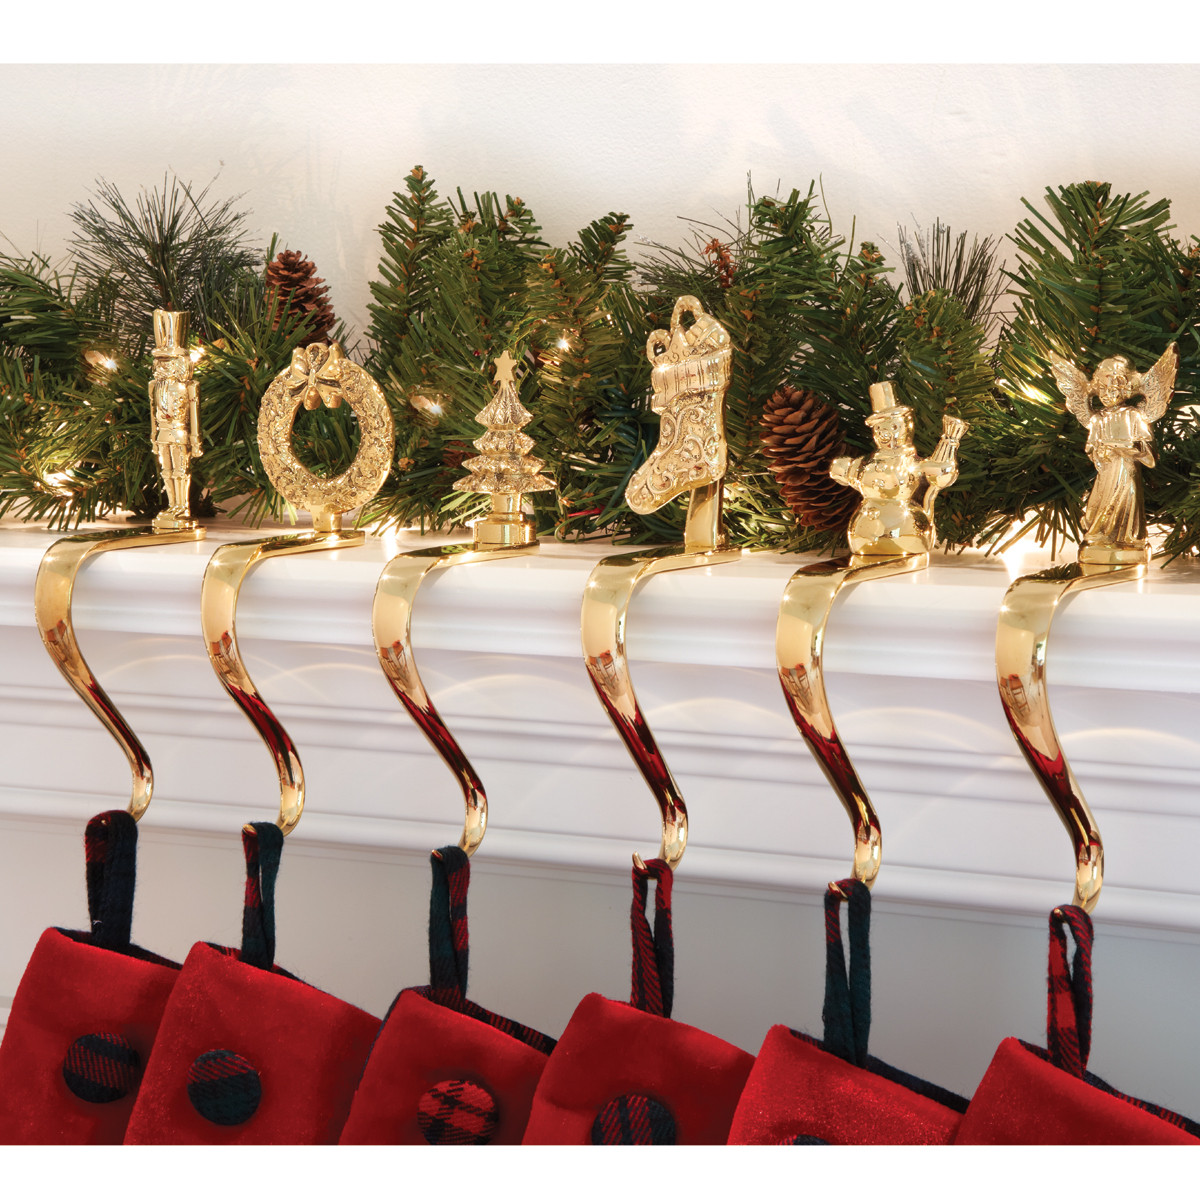 Fireplace Mantel Christmas Stocking Hooks
 Brass Stocking Holders with Design from Sporty s Tool Shop